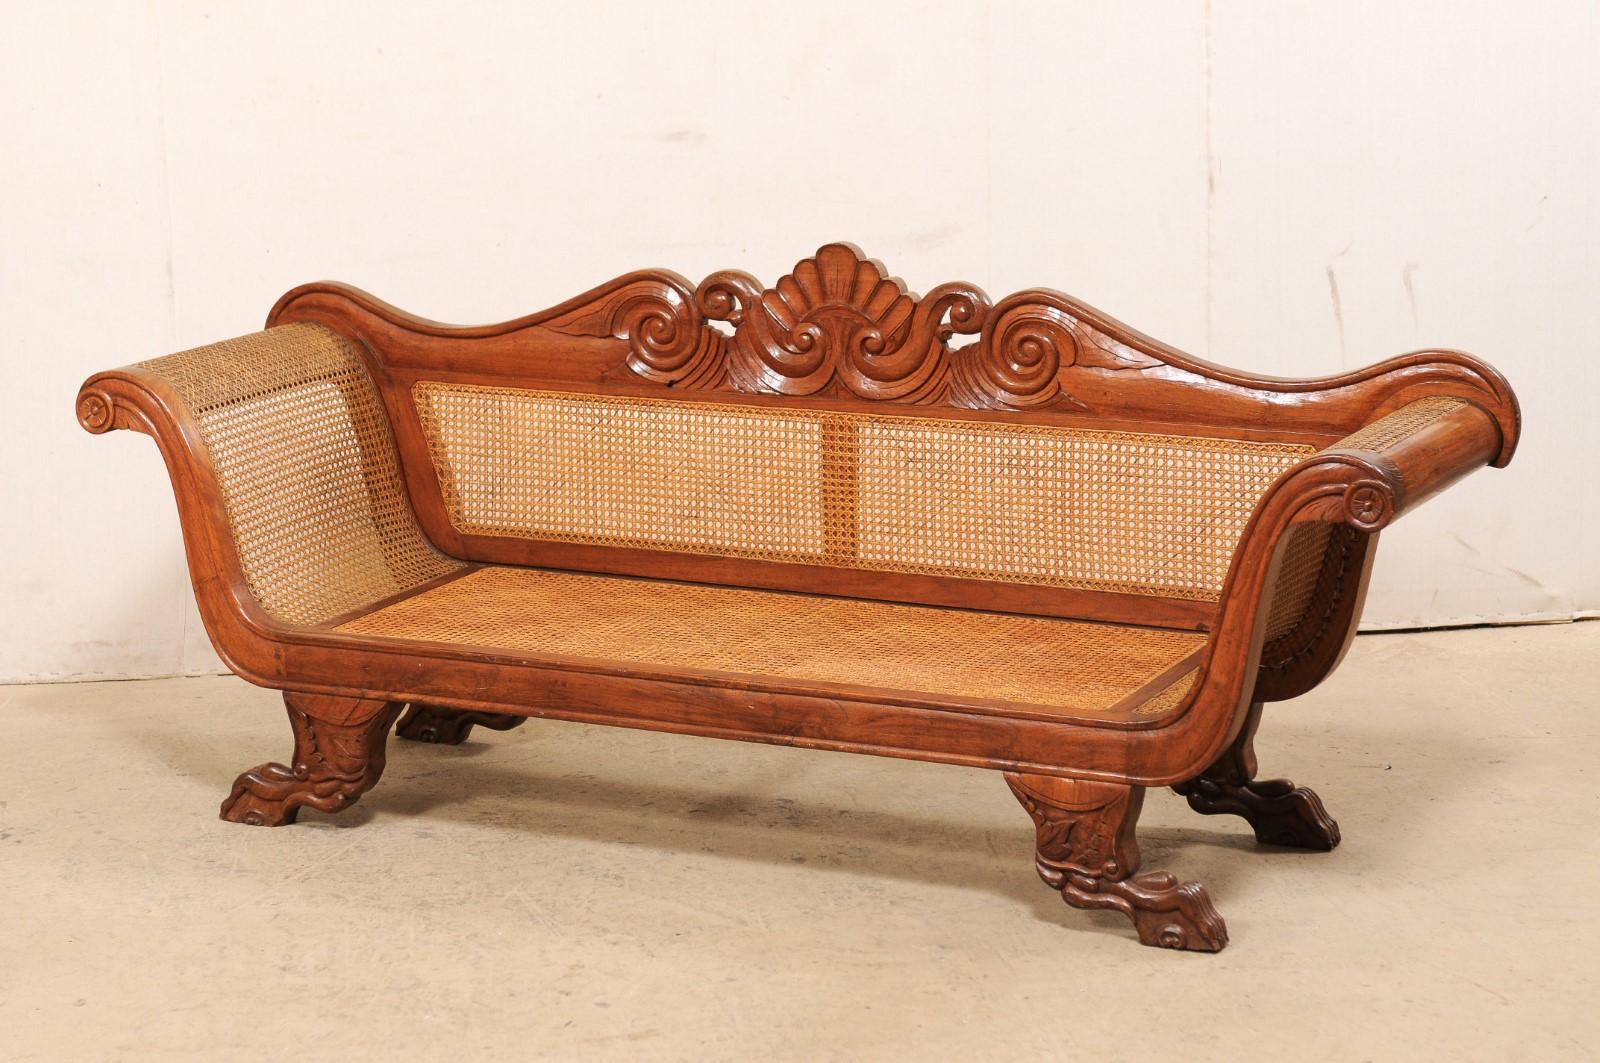 Antique Caribbean Regency Carved Wood and Hand Caned Sofa w/ Shell & Wave Crest For Sale 3